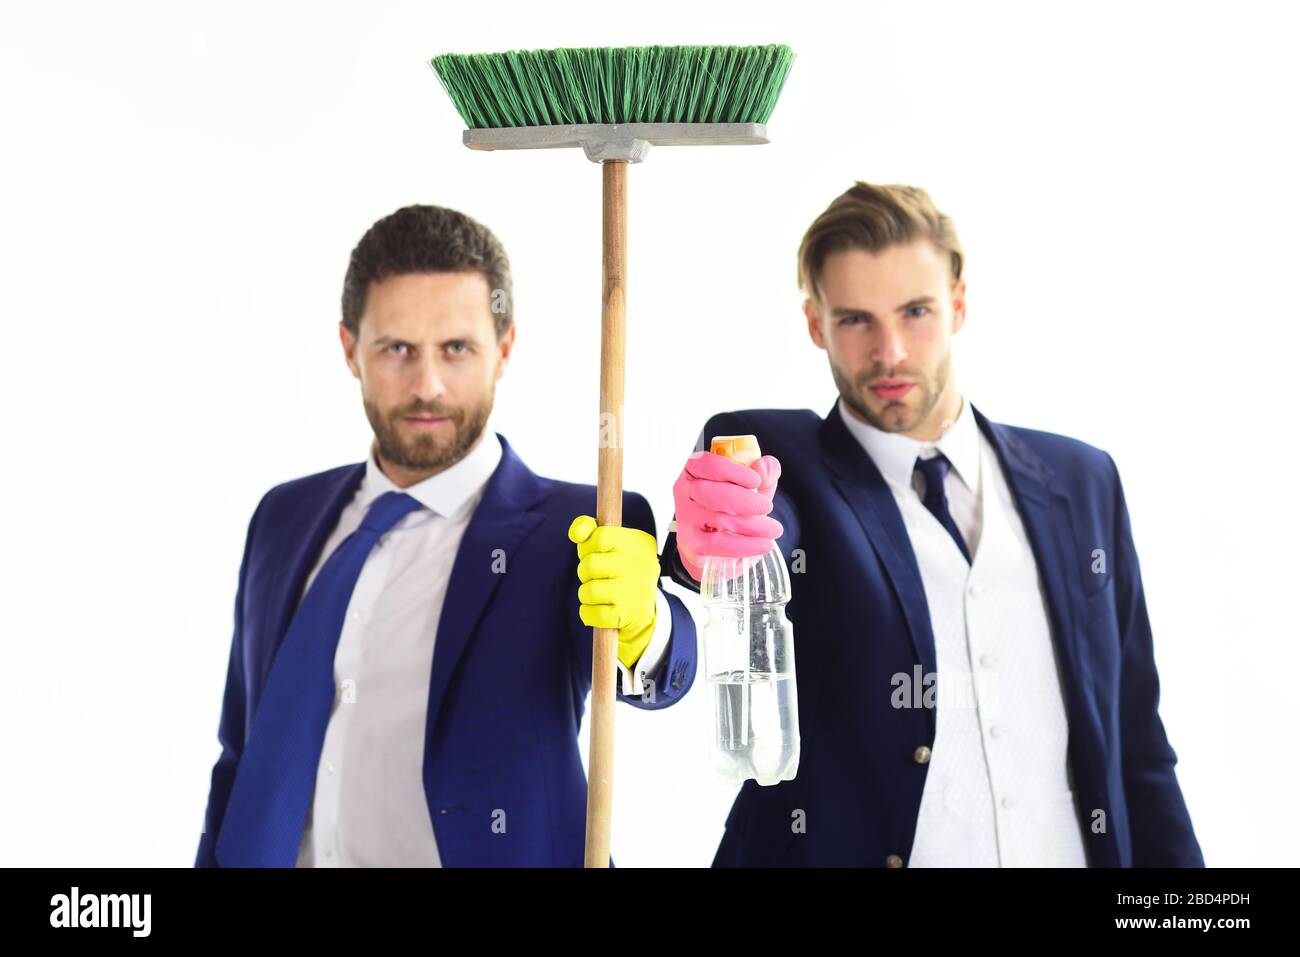 Housework, cleaning service, teamwork, business concept. Business people with beards and mop. Bearded friends in formal suits with serious faces and sweep. Banker and financier hold cleaning supplies. Stock Photo